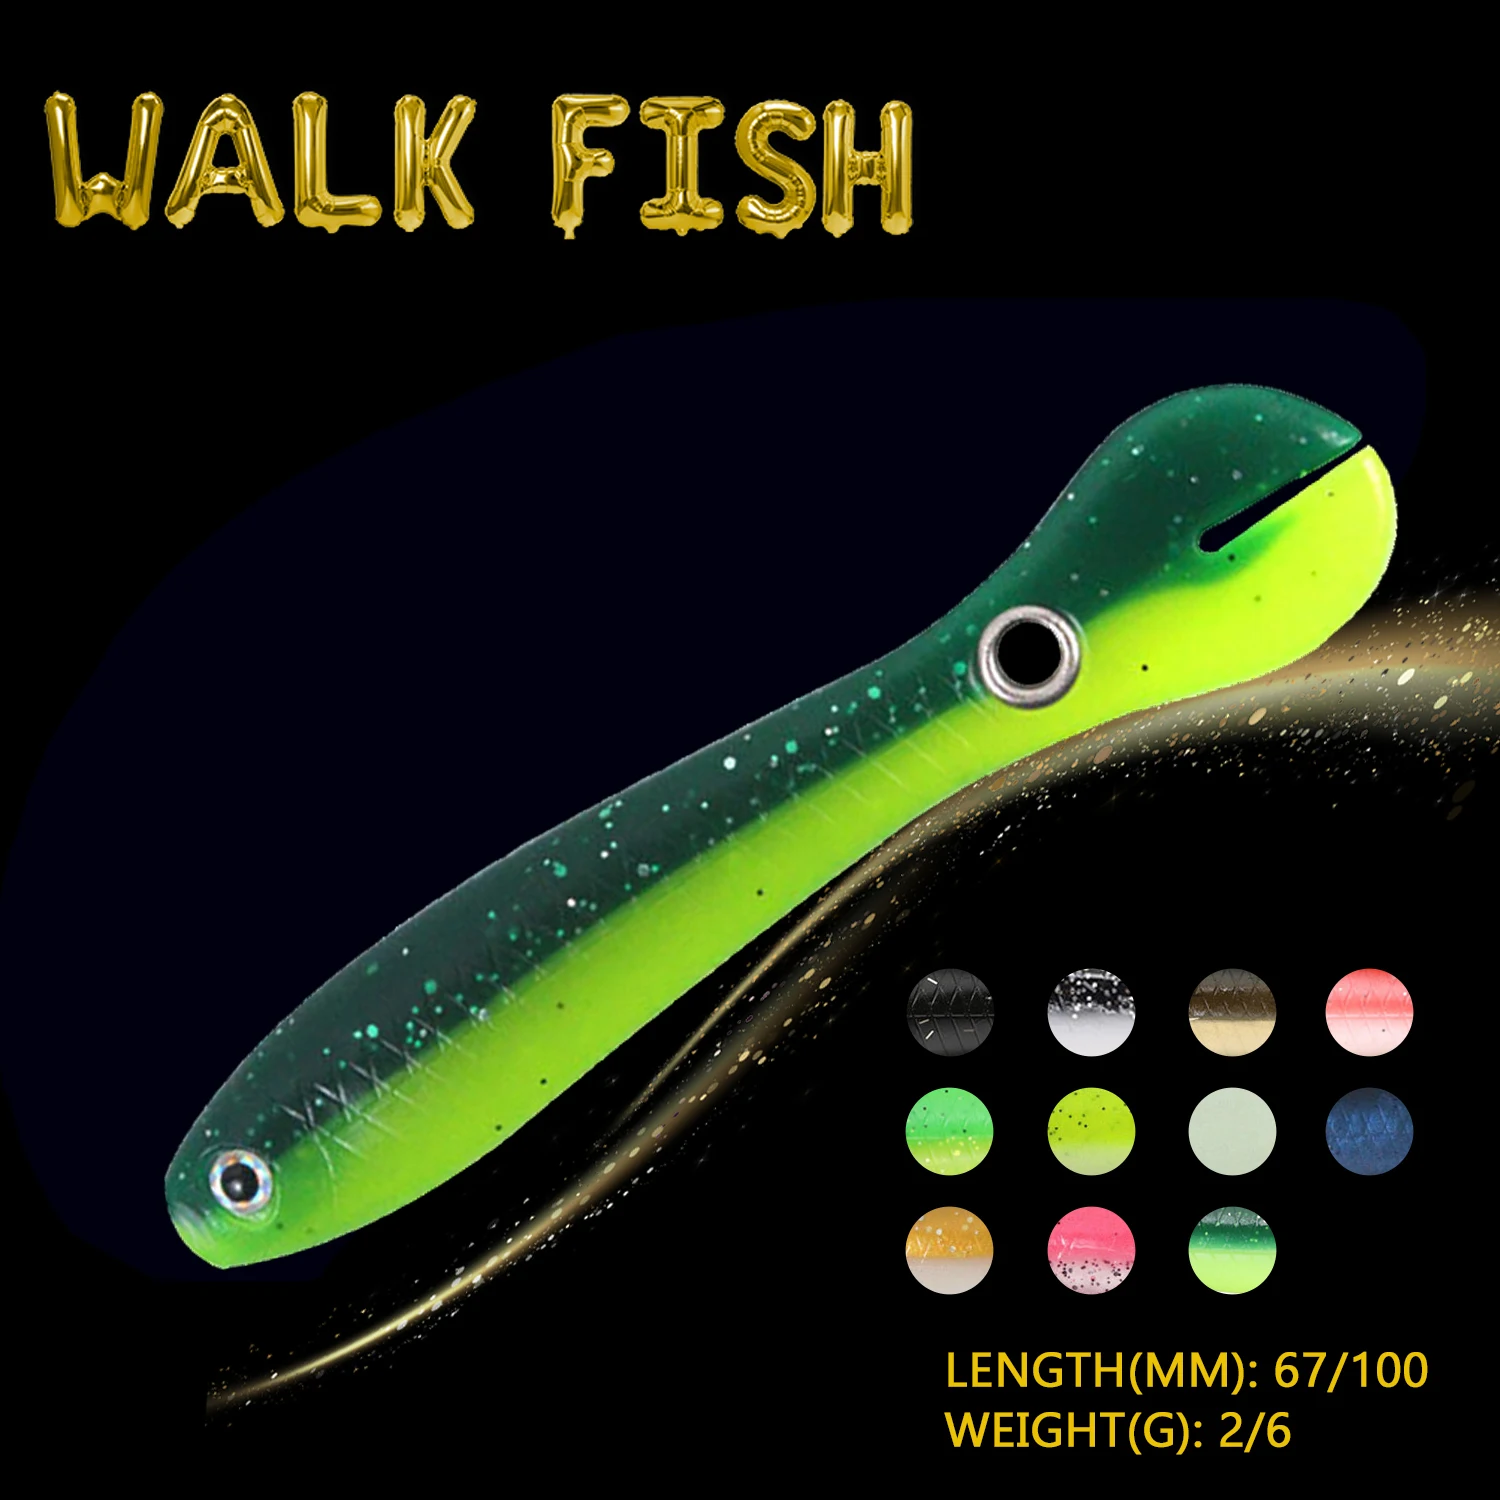 WALK FISH 5Pcs/Lot 2g/6g Artificial Silicone Bionic Soft Fishing Lure Wobble Tail Small Loach Lure  Swimbait For Pike Bass Pesca